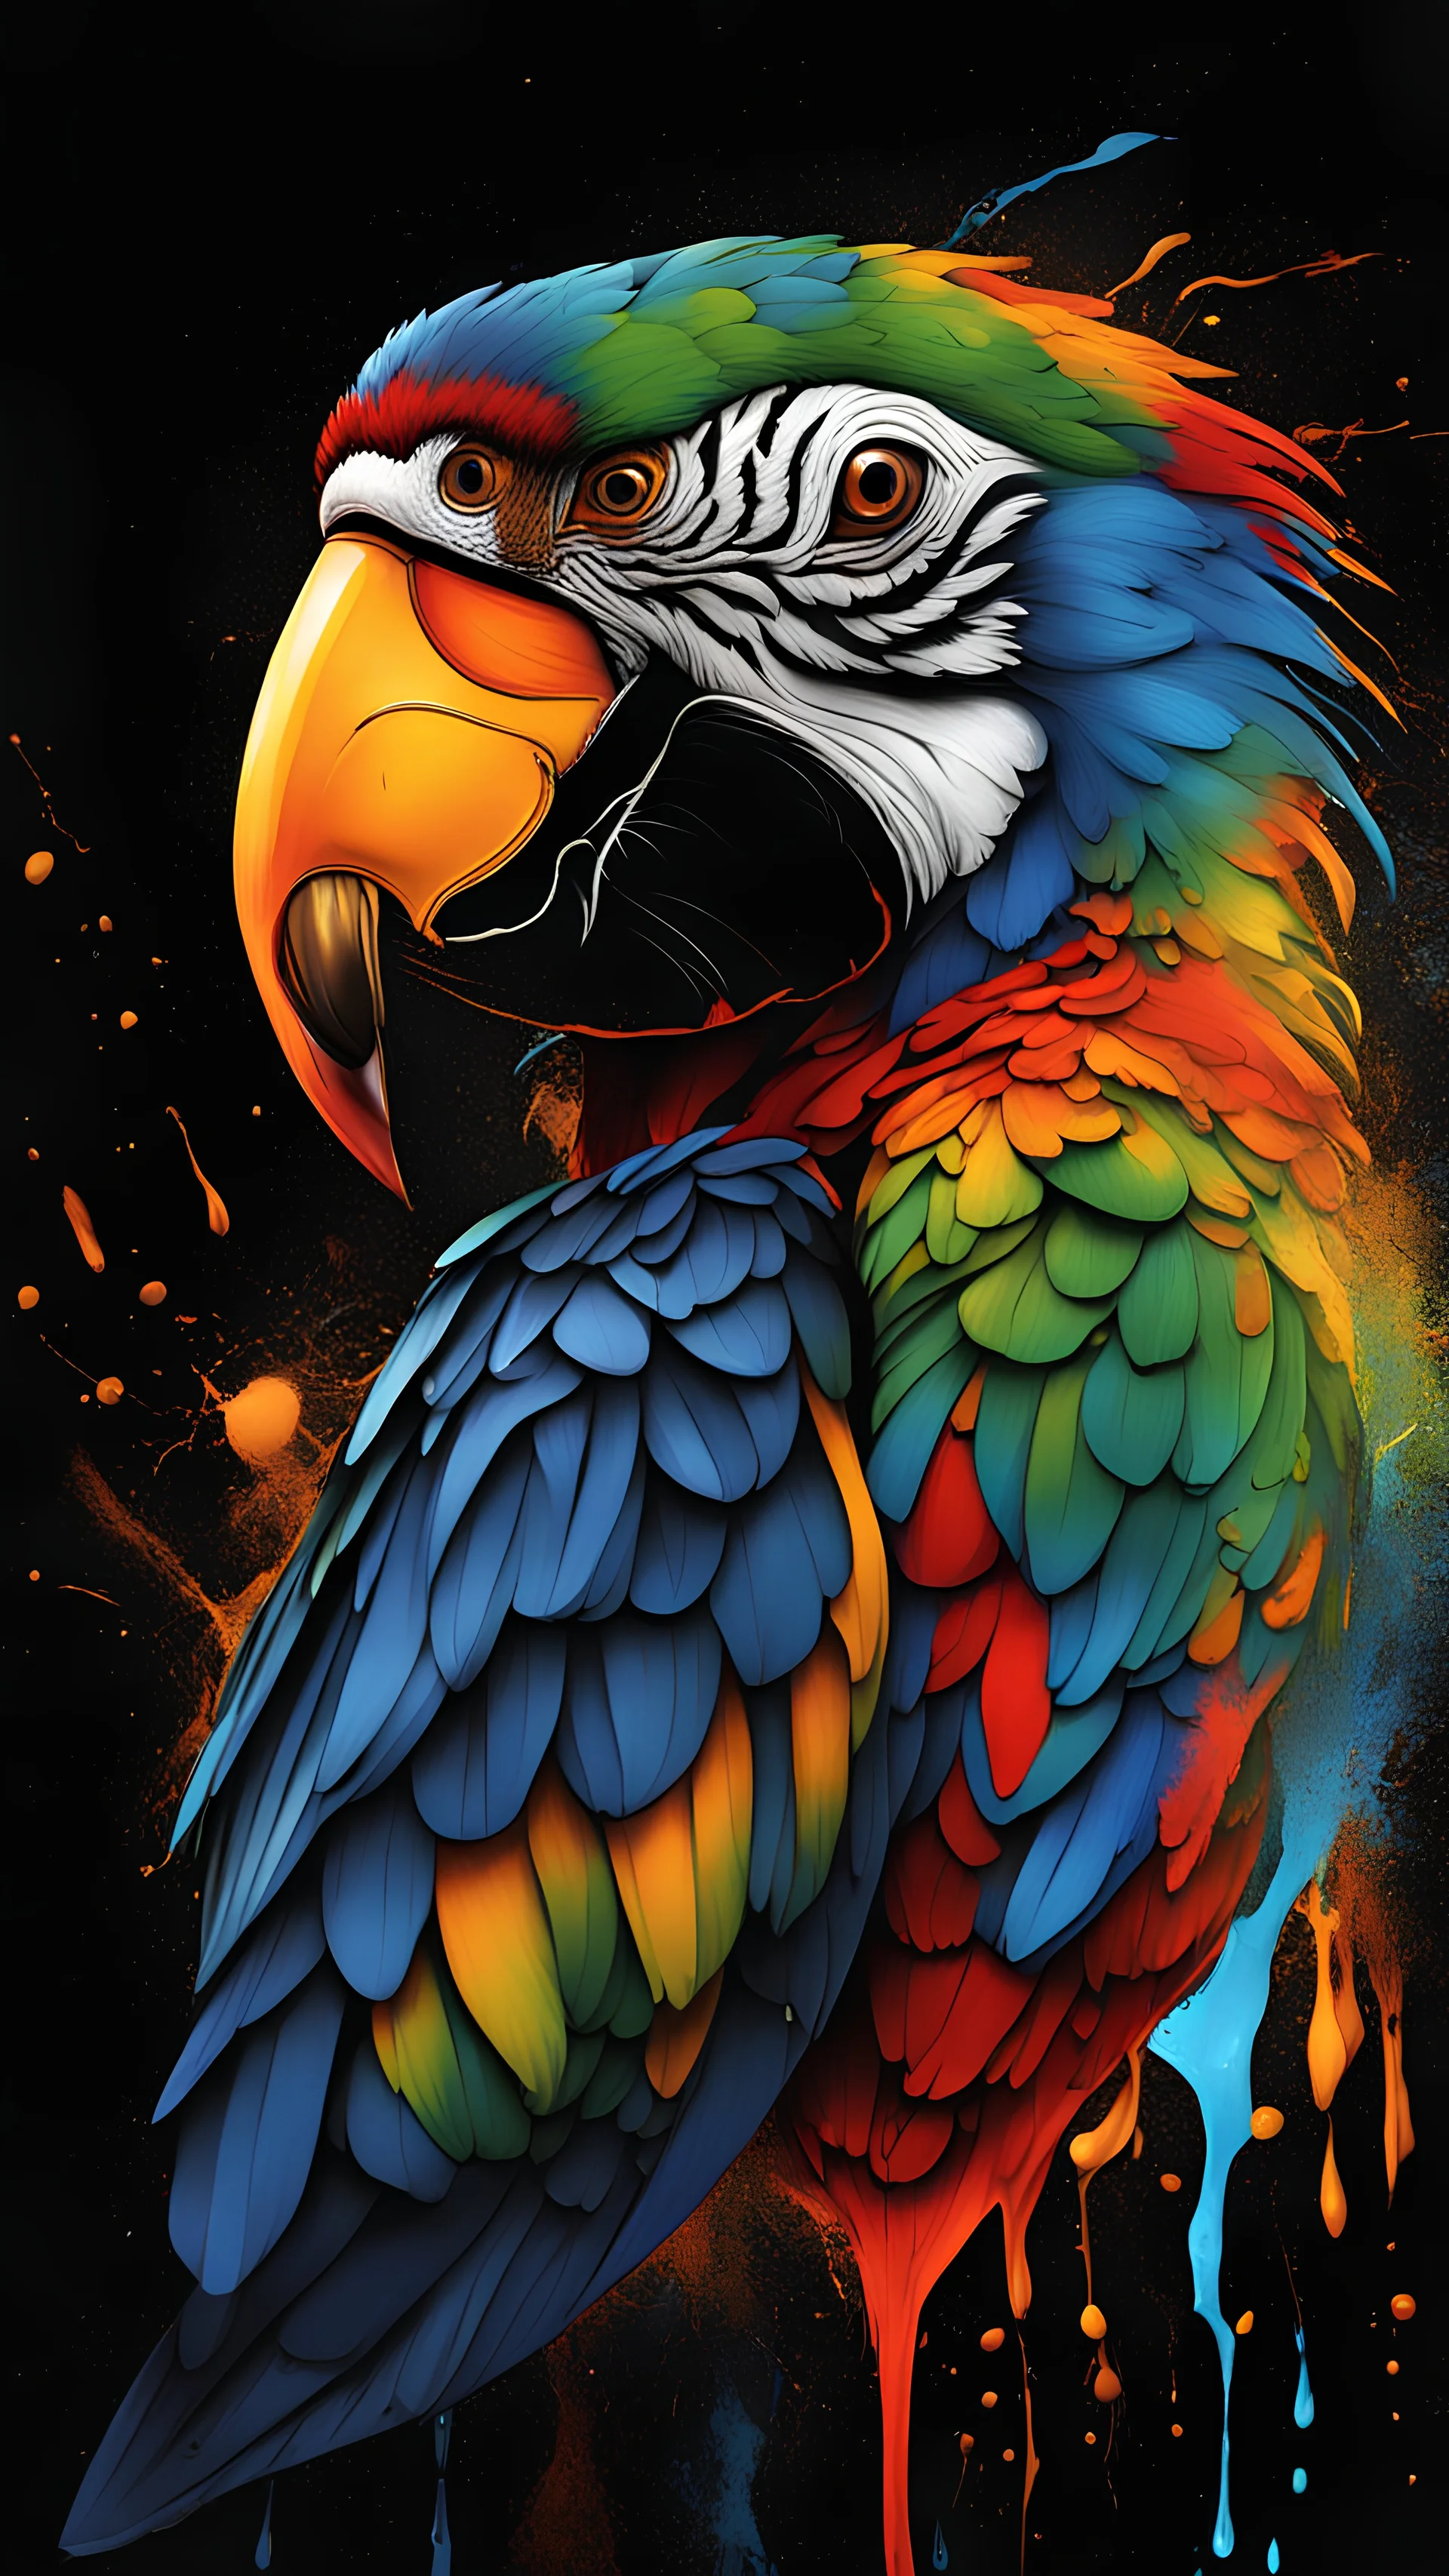 Parrot, Line Art, Black Background, Ultra Detailed Artistic, Detailed Gorgeous Face, Natural Skin, Water Splash, Colour Splash Art, Fire and Ice, Splatter, Black Ink, Liquid Melting, Dreamy, Glowing, Glamour, Glimmer, Shadows, Oil On Canvas, Brush Strokes, Smooth, Ultra High Definition, 8k, Unreal Engine 5, Ultra Sharp Focus, Intricate Artwork Masterpiece, Ominous, Golden Ratio, Highly Detailed, photo, poster, fashion, illustration